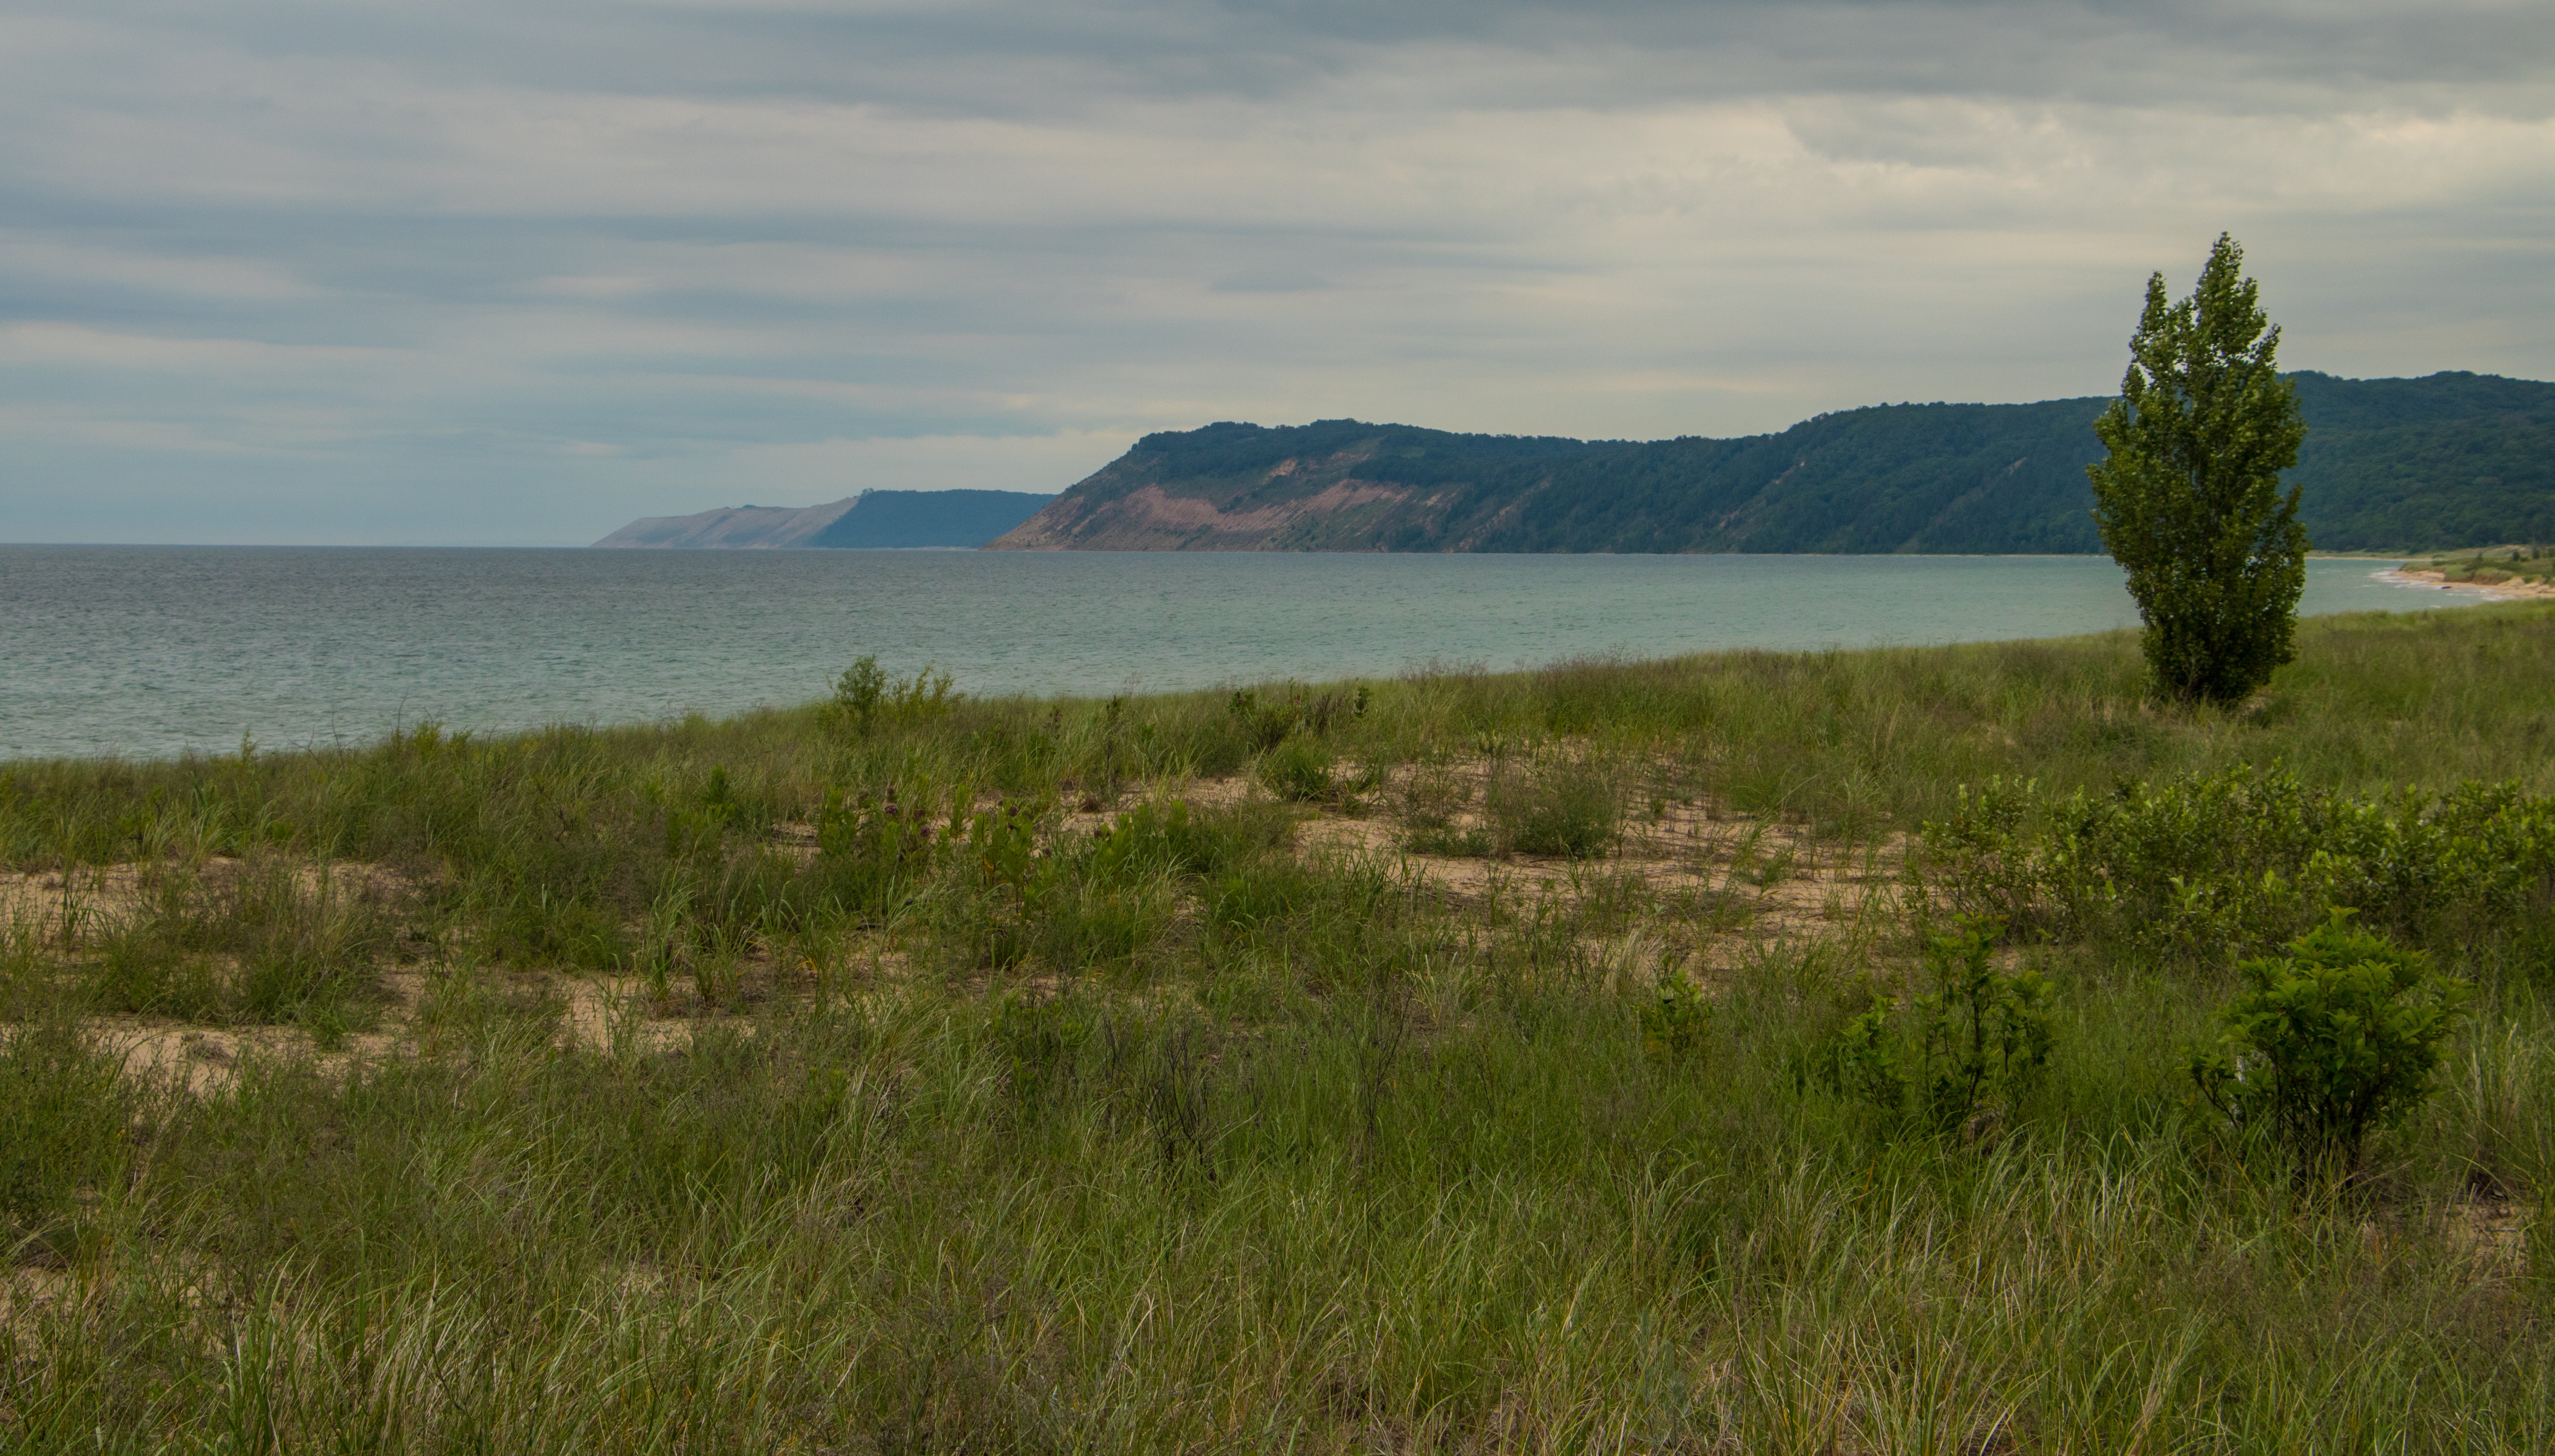 An easy sandy 1/4 mile trail from the campground leads you out to this amazing view and beach on the shore of Lake Michigan.